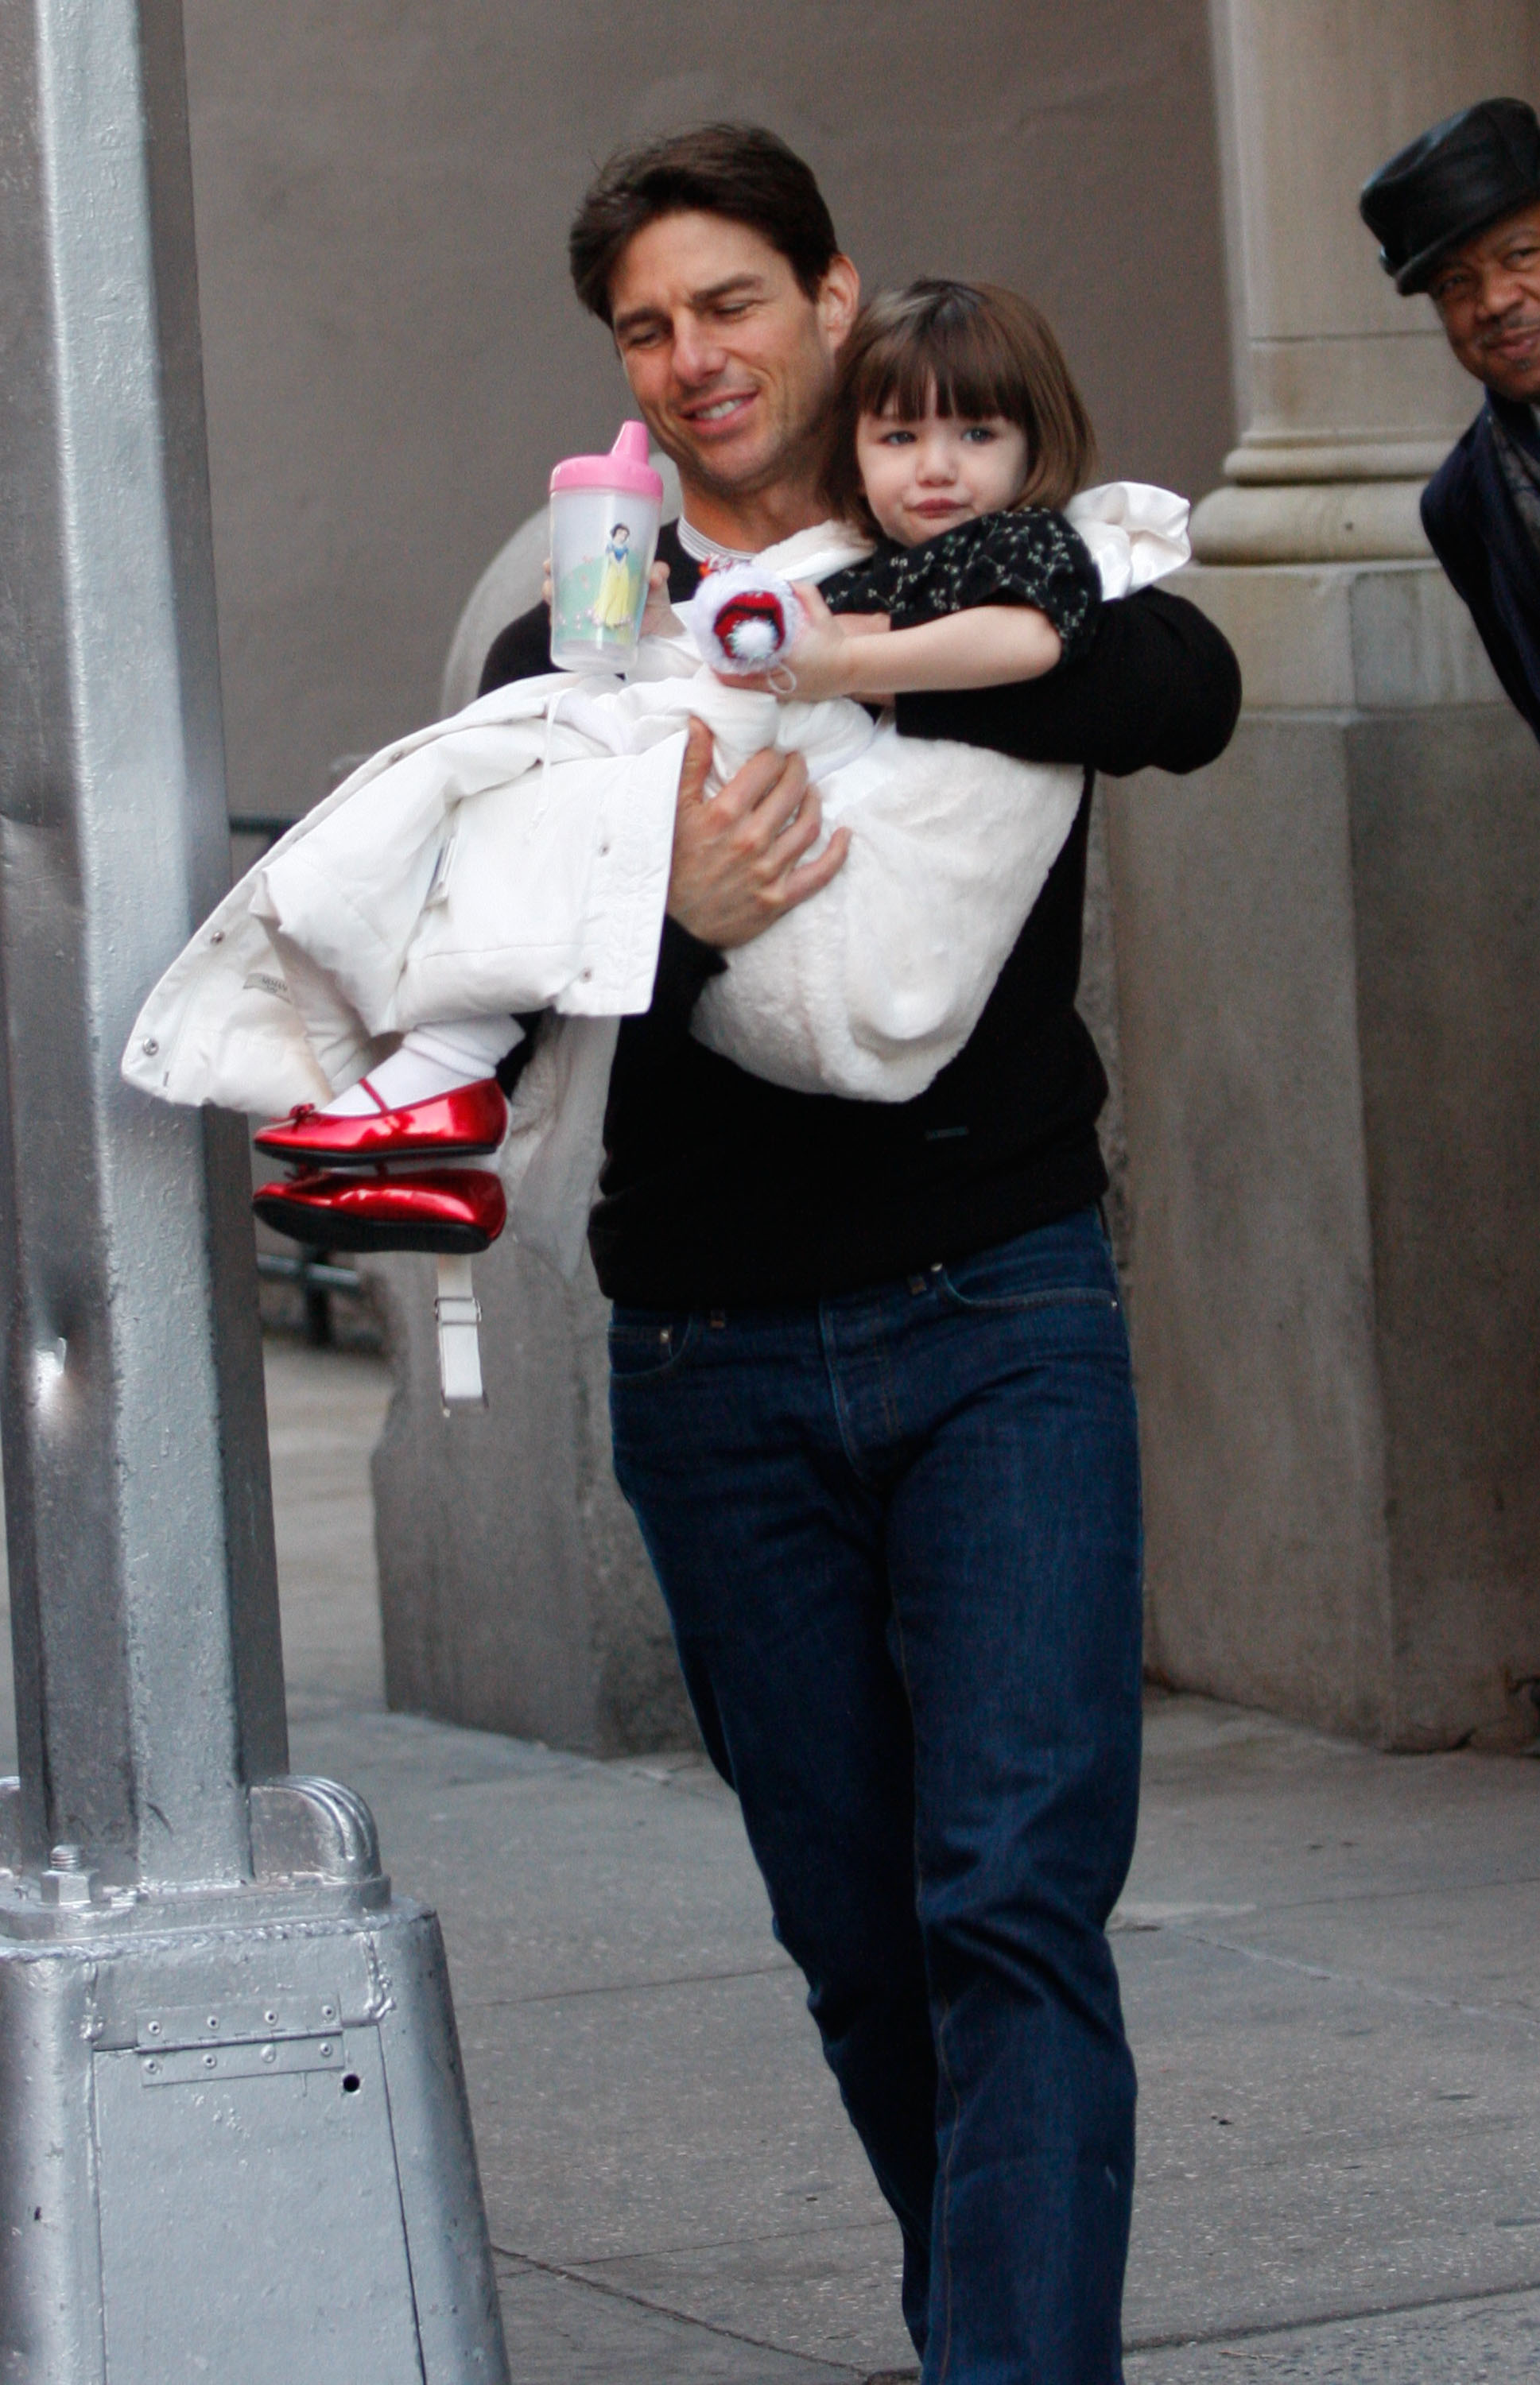 Tom Cruise and Suri Cruise are seen on the streets of Manhattan in New York City, on December 3, 2008. | Source: Getty Images